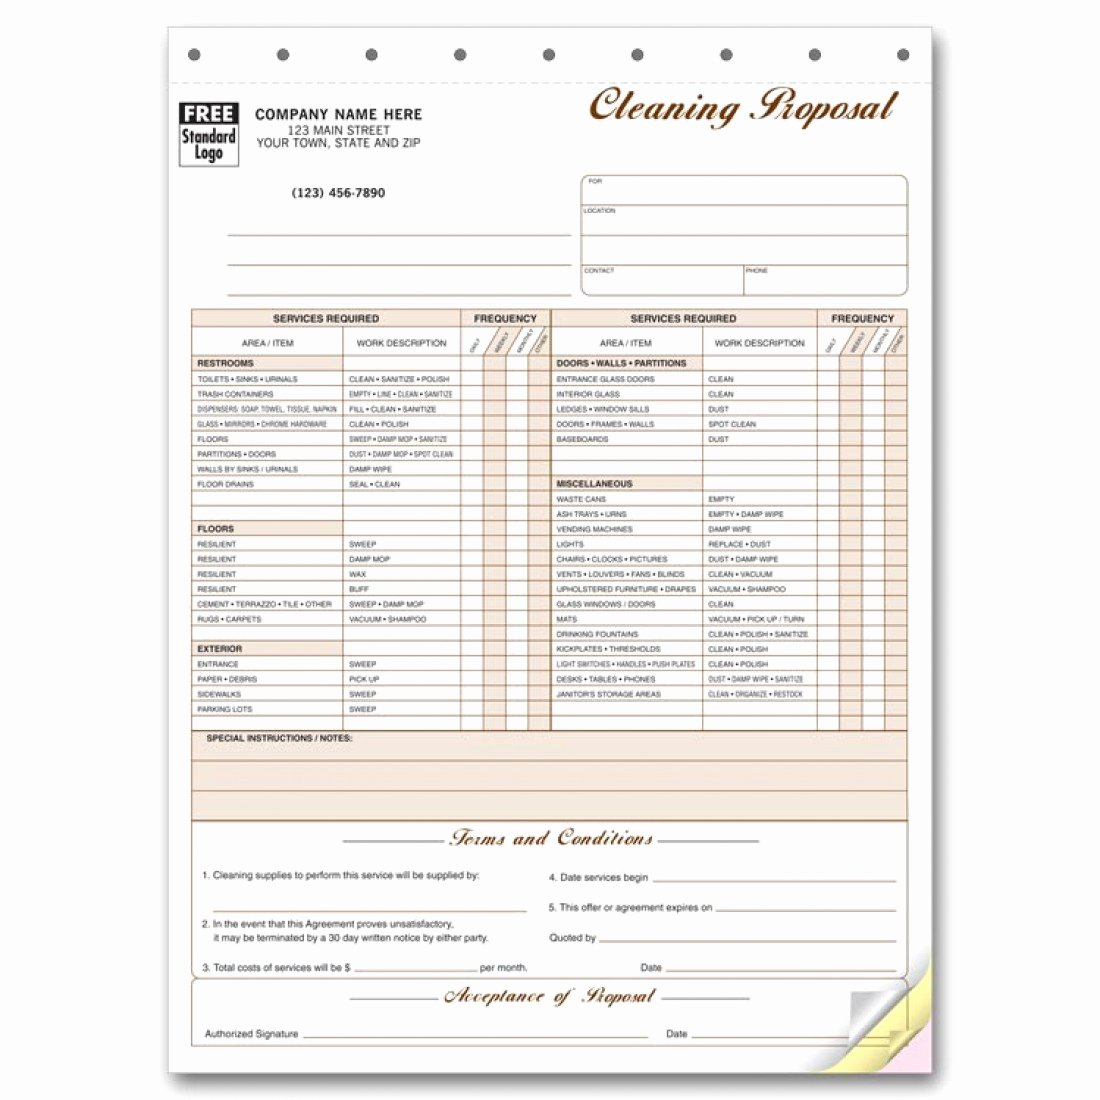 Commercial Cleaning Proposal Template Free Fresh Cleaning Proposal forms